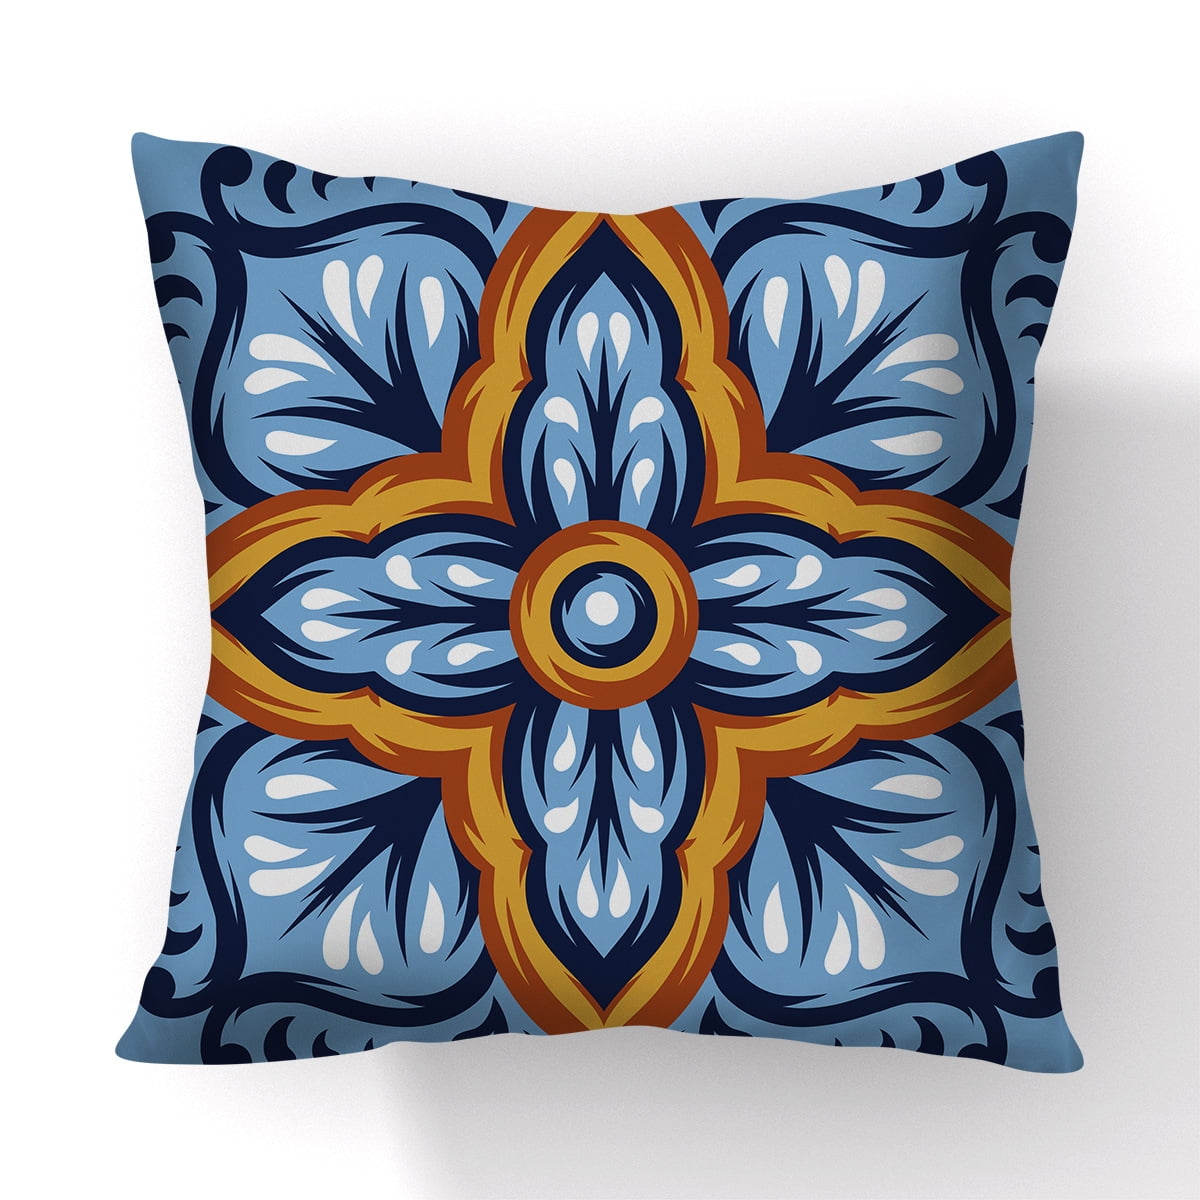 QIQIANY Set of 4 Retro Floral Blue and Orange Throw Pillow Covers 18x18 Inch Linen Fabric Modern Farmhouse Decor Floral Pillow Case Indoor/Outdoor Cushion Cover for Sofa Bed Car Chair Room 